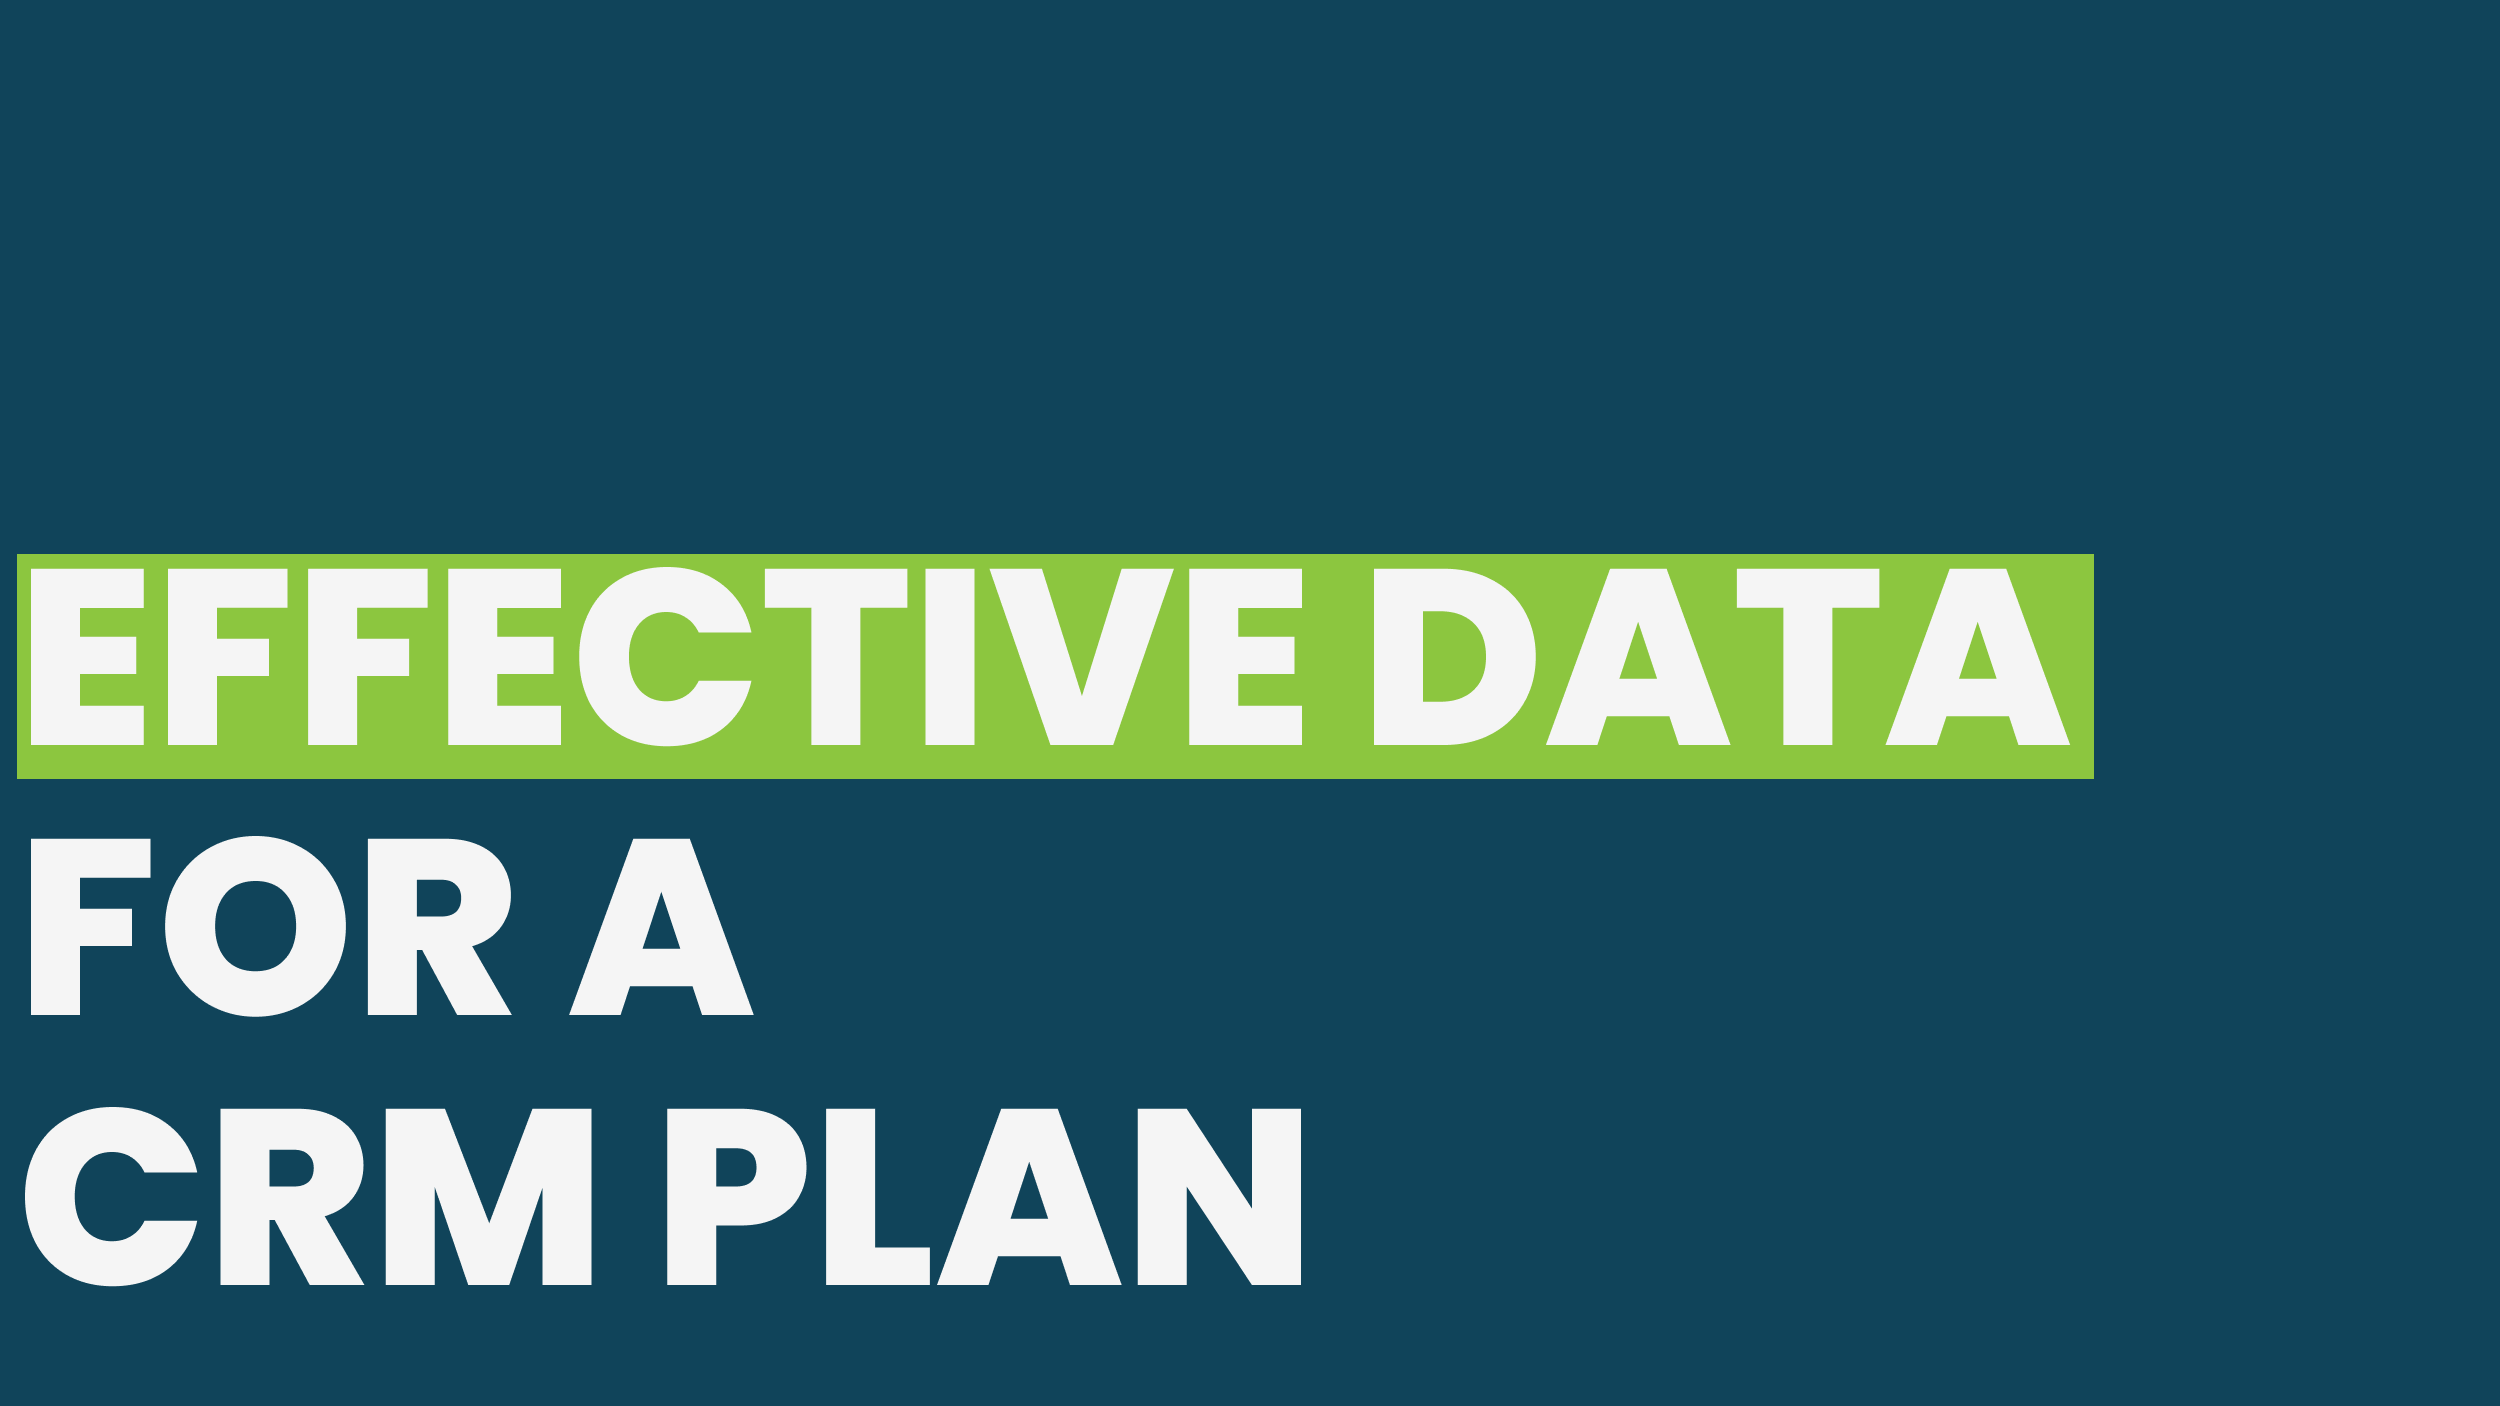 EFFECTIVE PLAN FOR A CRM PLAN